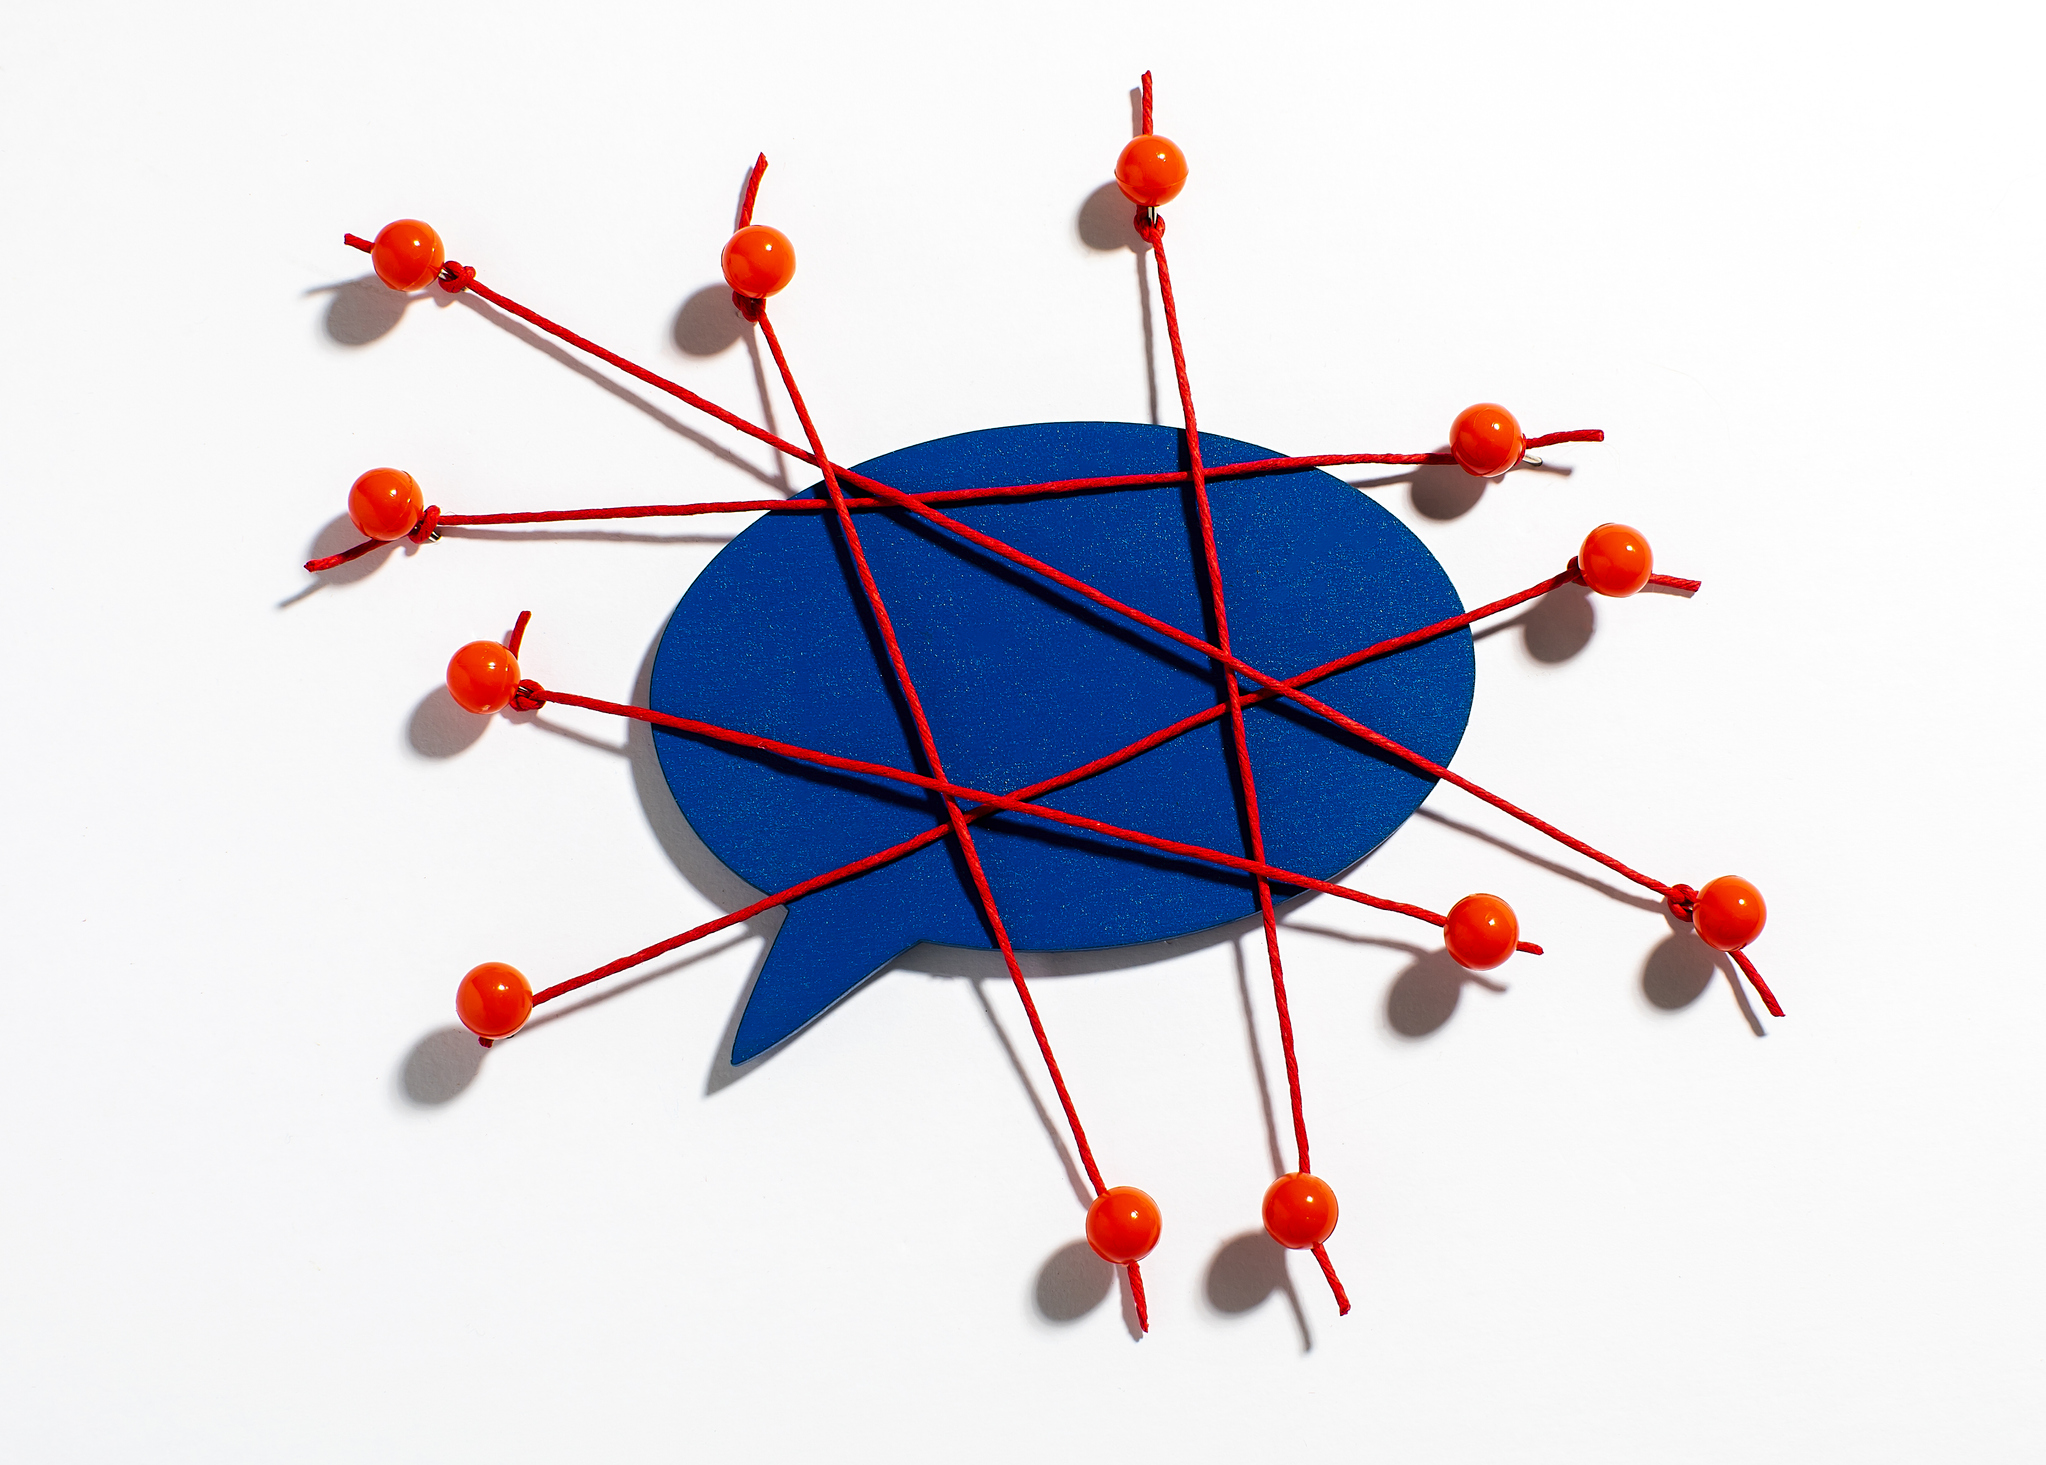 Image of a blue cartoon speech bubble wrapped in a web of red threads held down with pushpins.